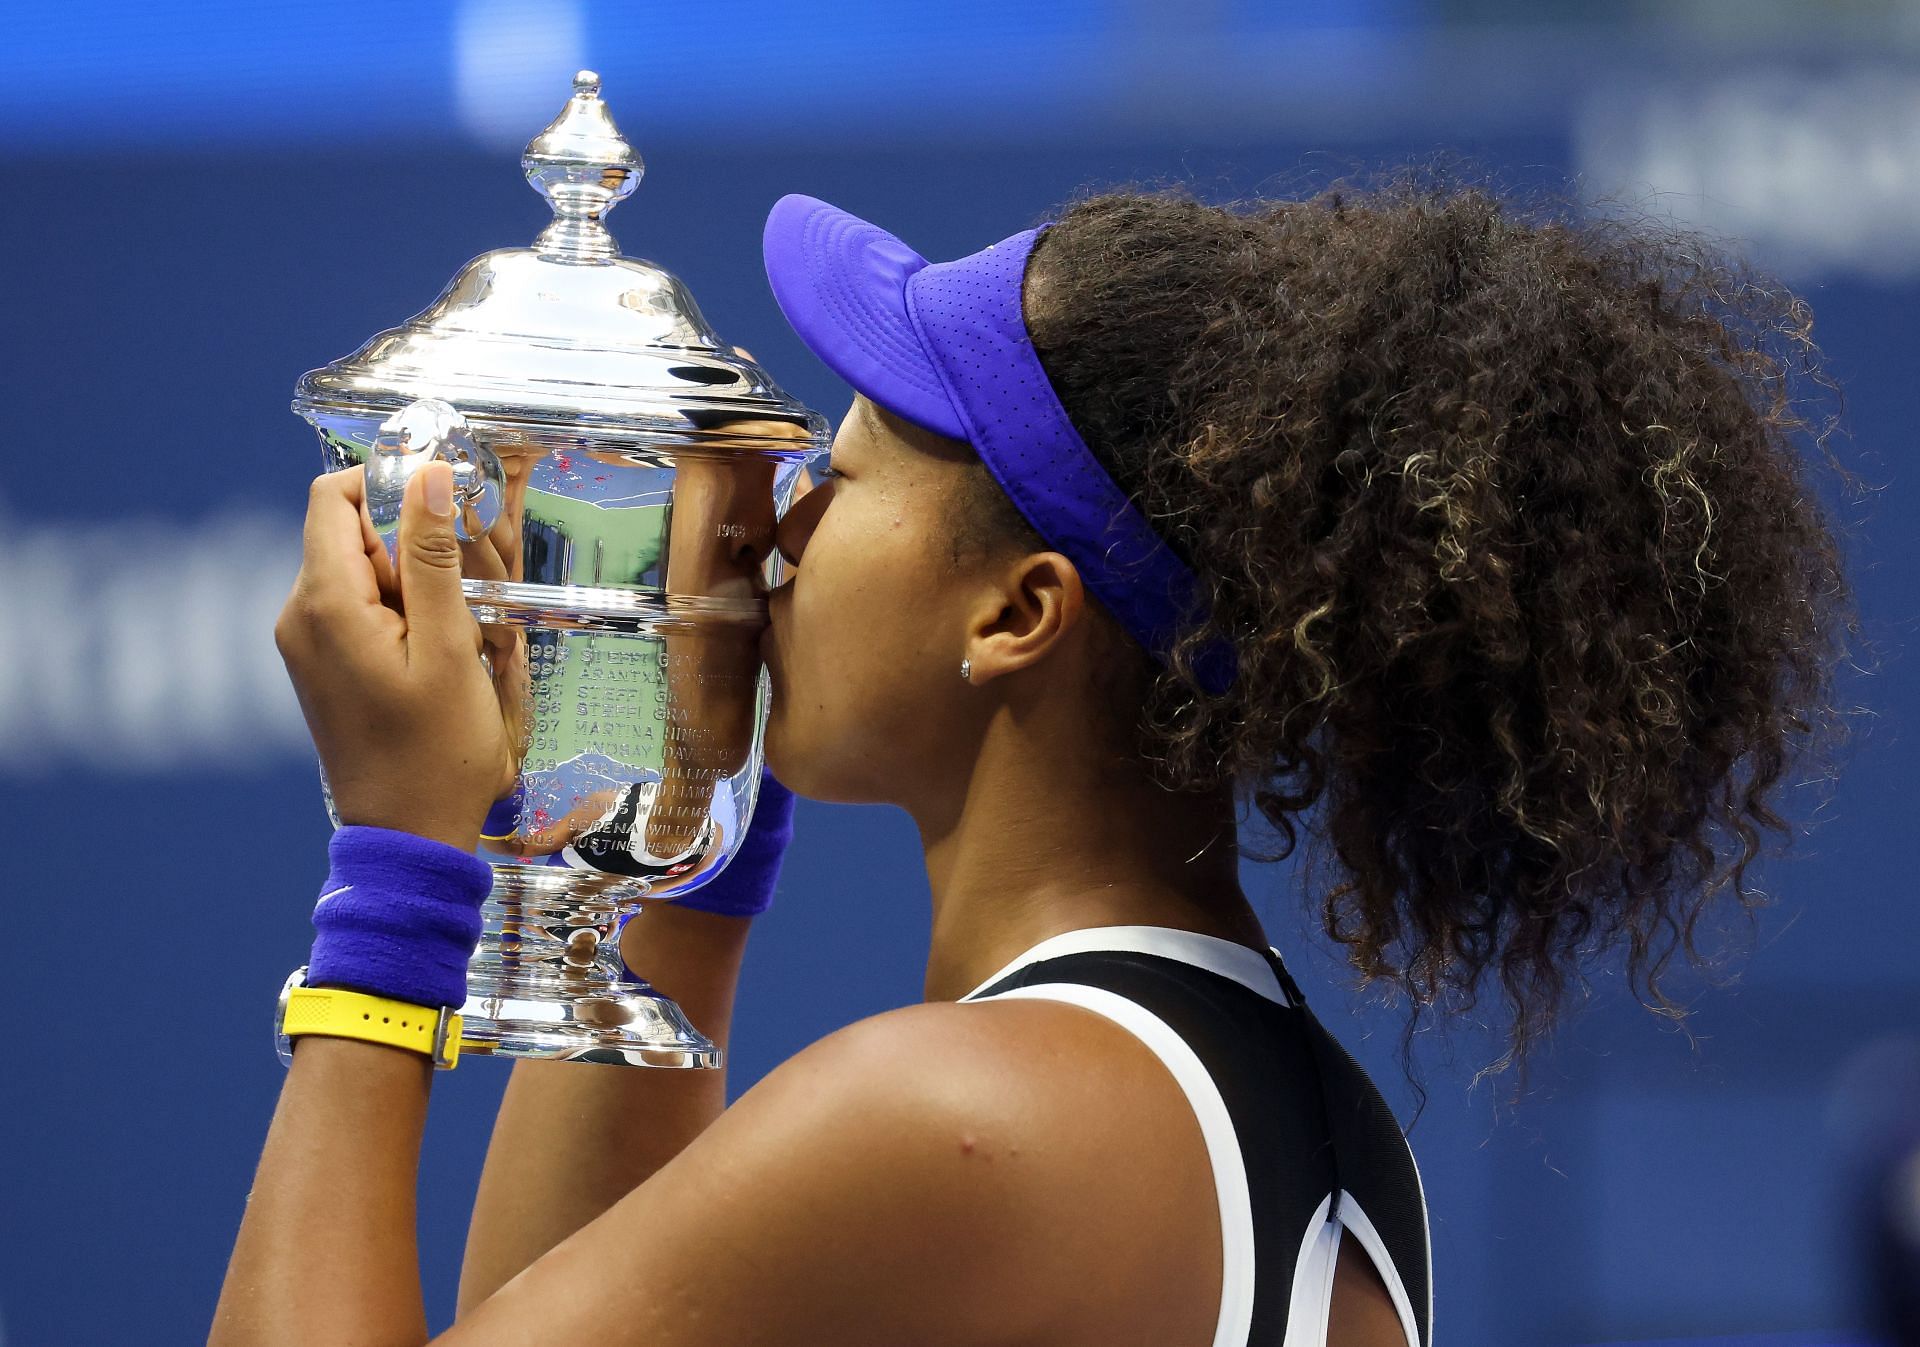 Should you bet on Naomi Osaka to win US Open 2022?